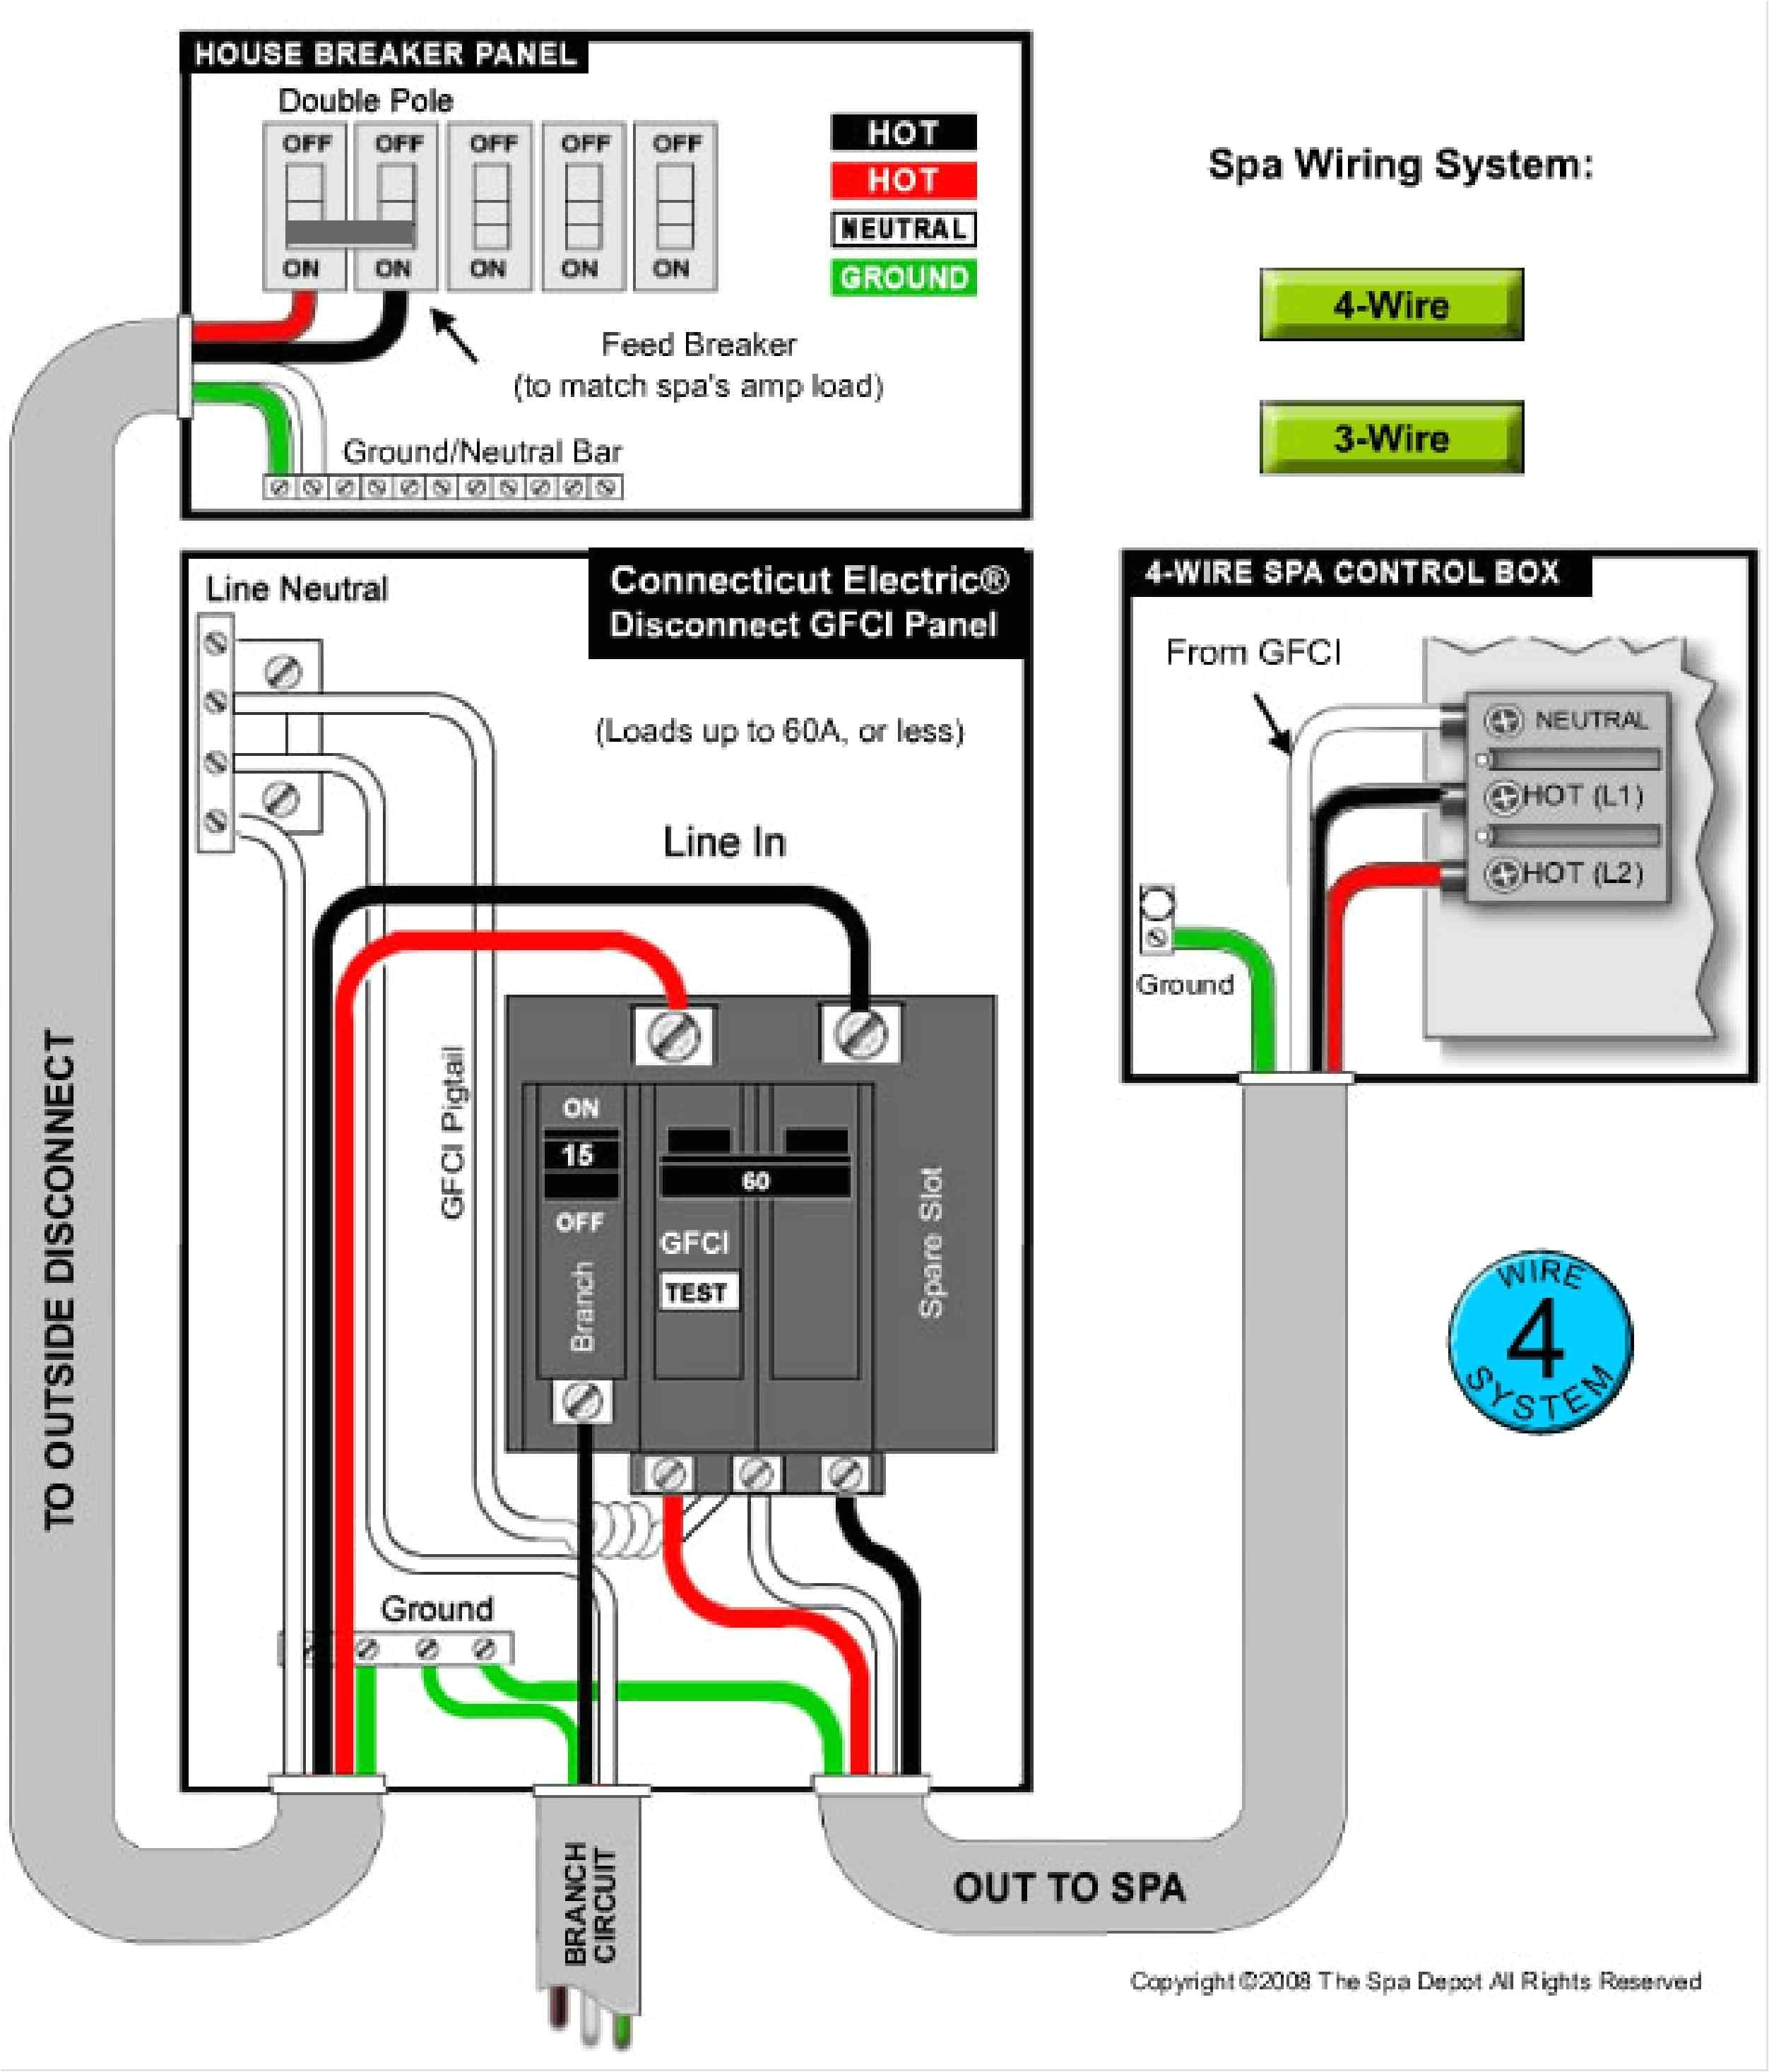 gfci breaker wiring diagram reference square d hot tub gfci breaker wiring diagram download of gfci breaker wiring diagram png